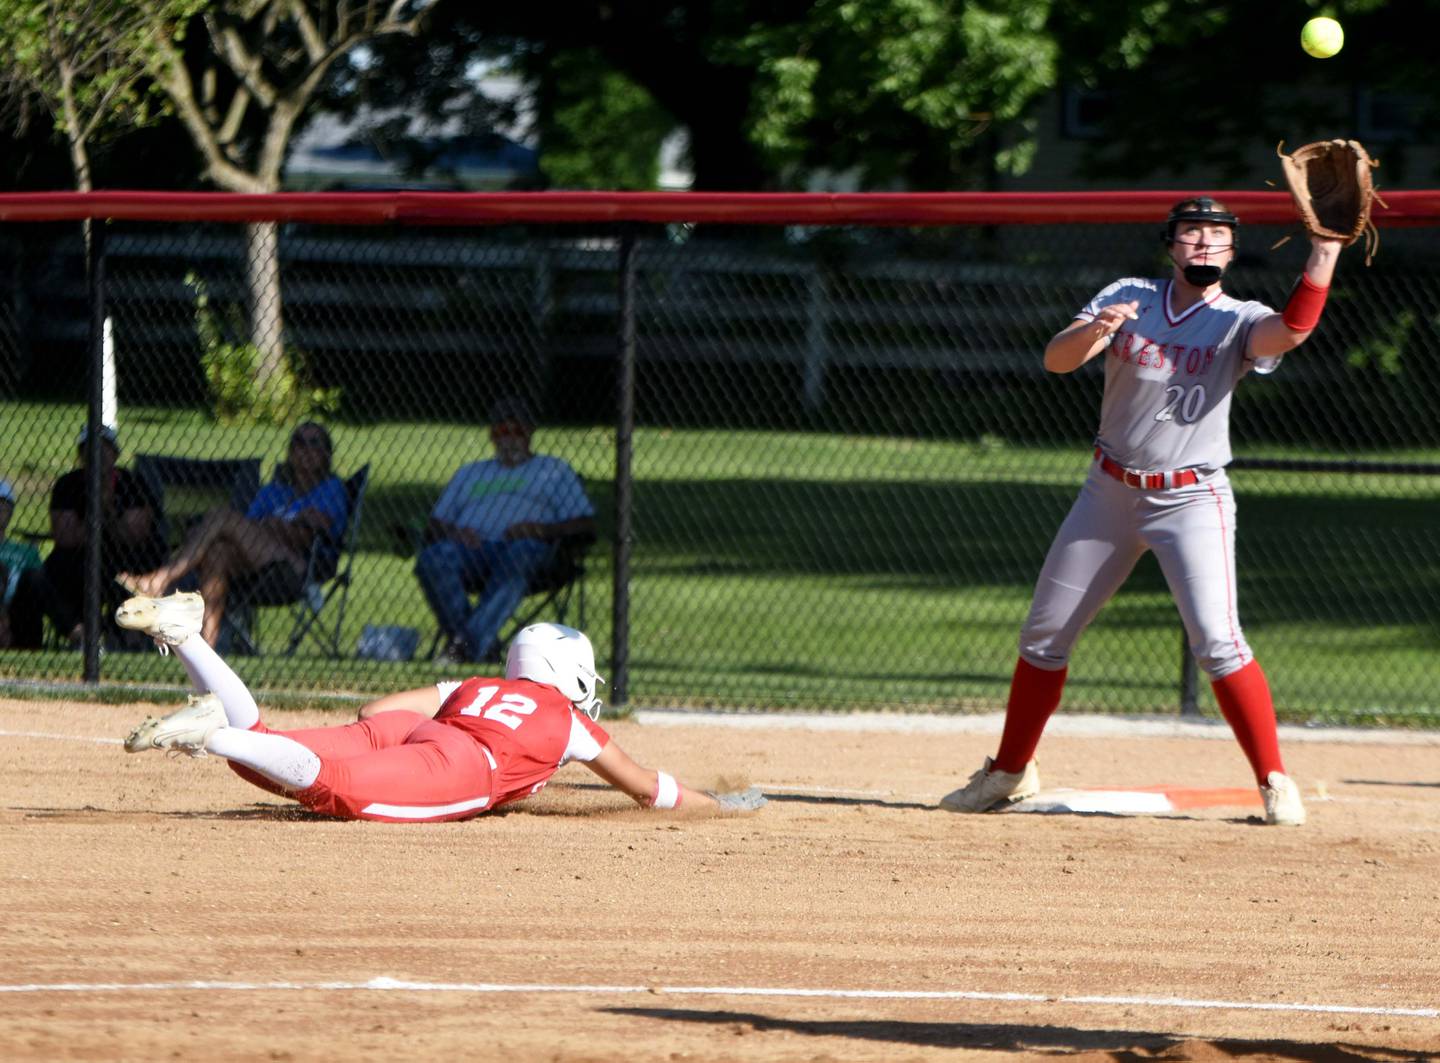 First baseman Kennedy Strider gets the out at first on a double play.